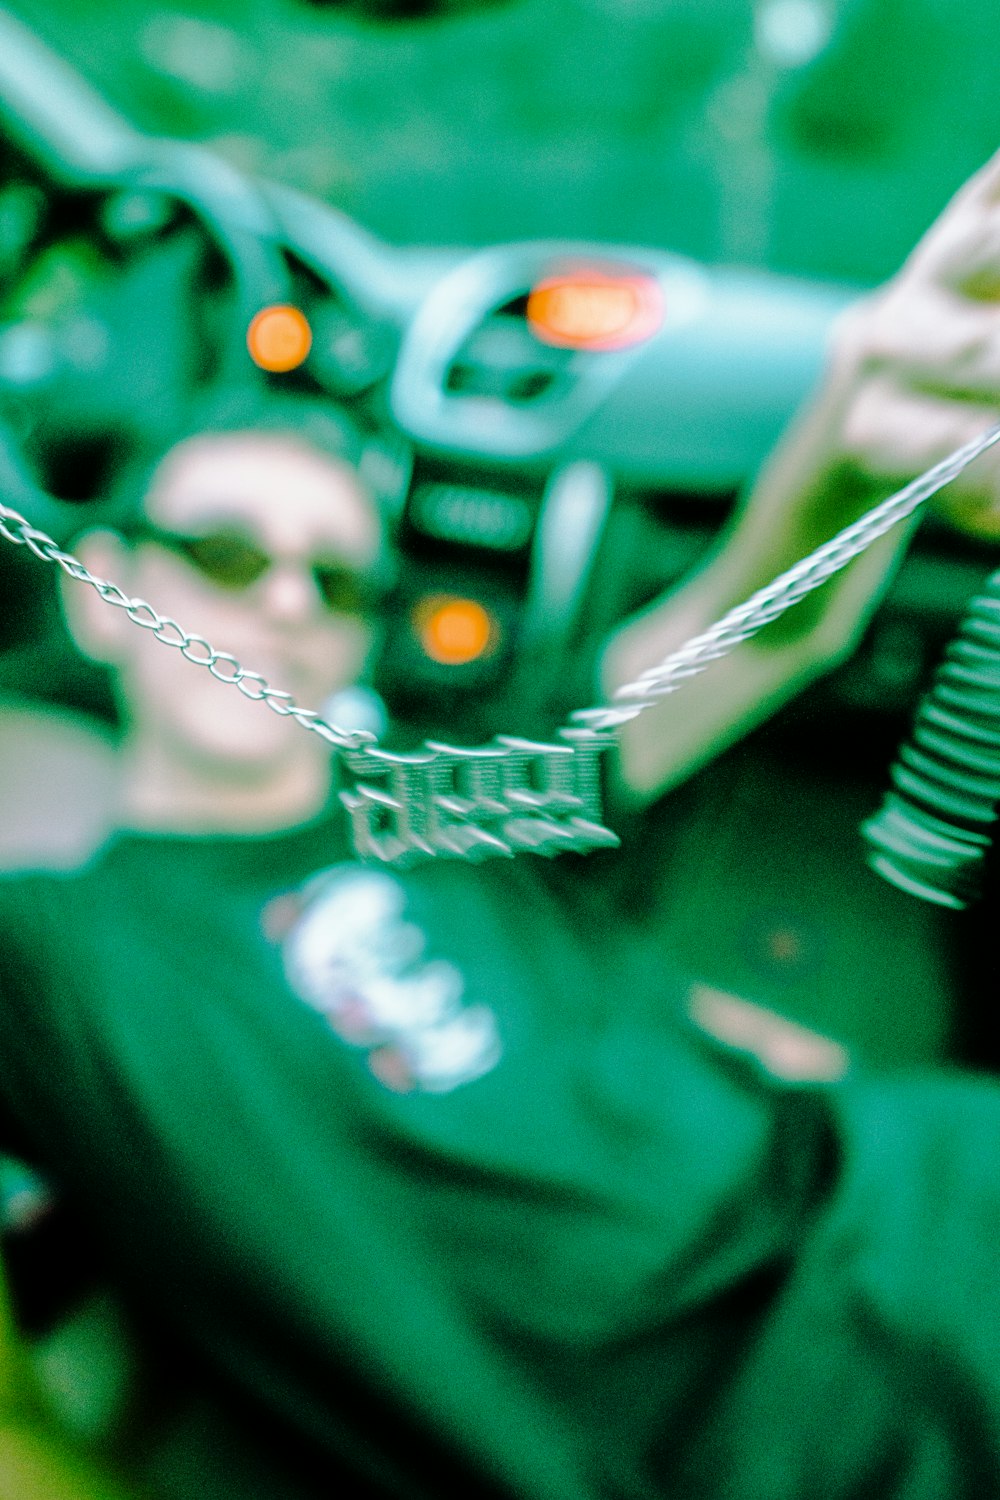 silver necklace on green car